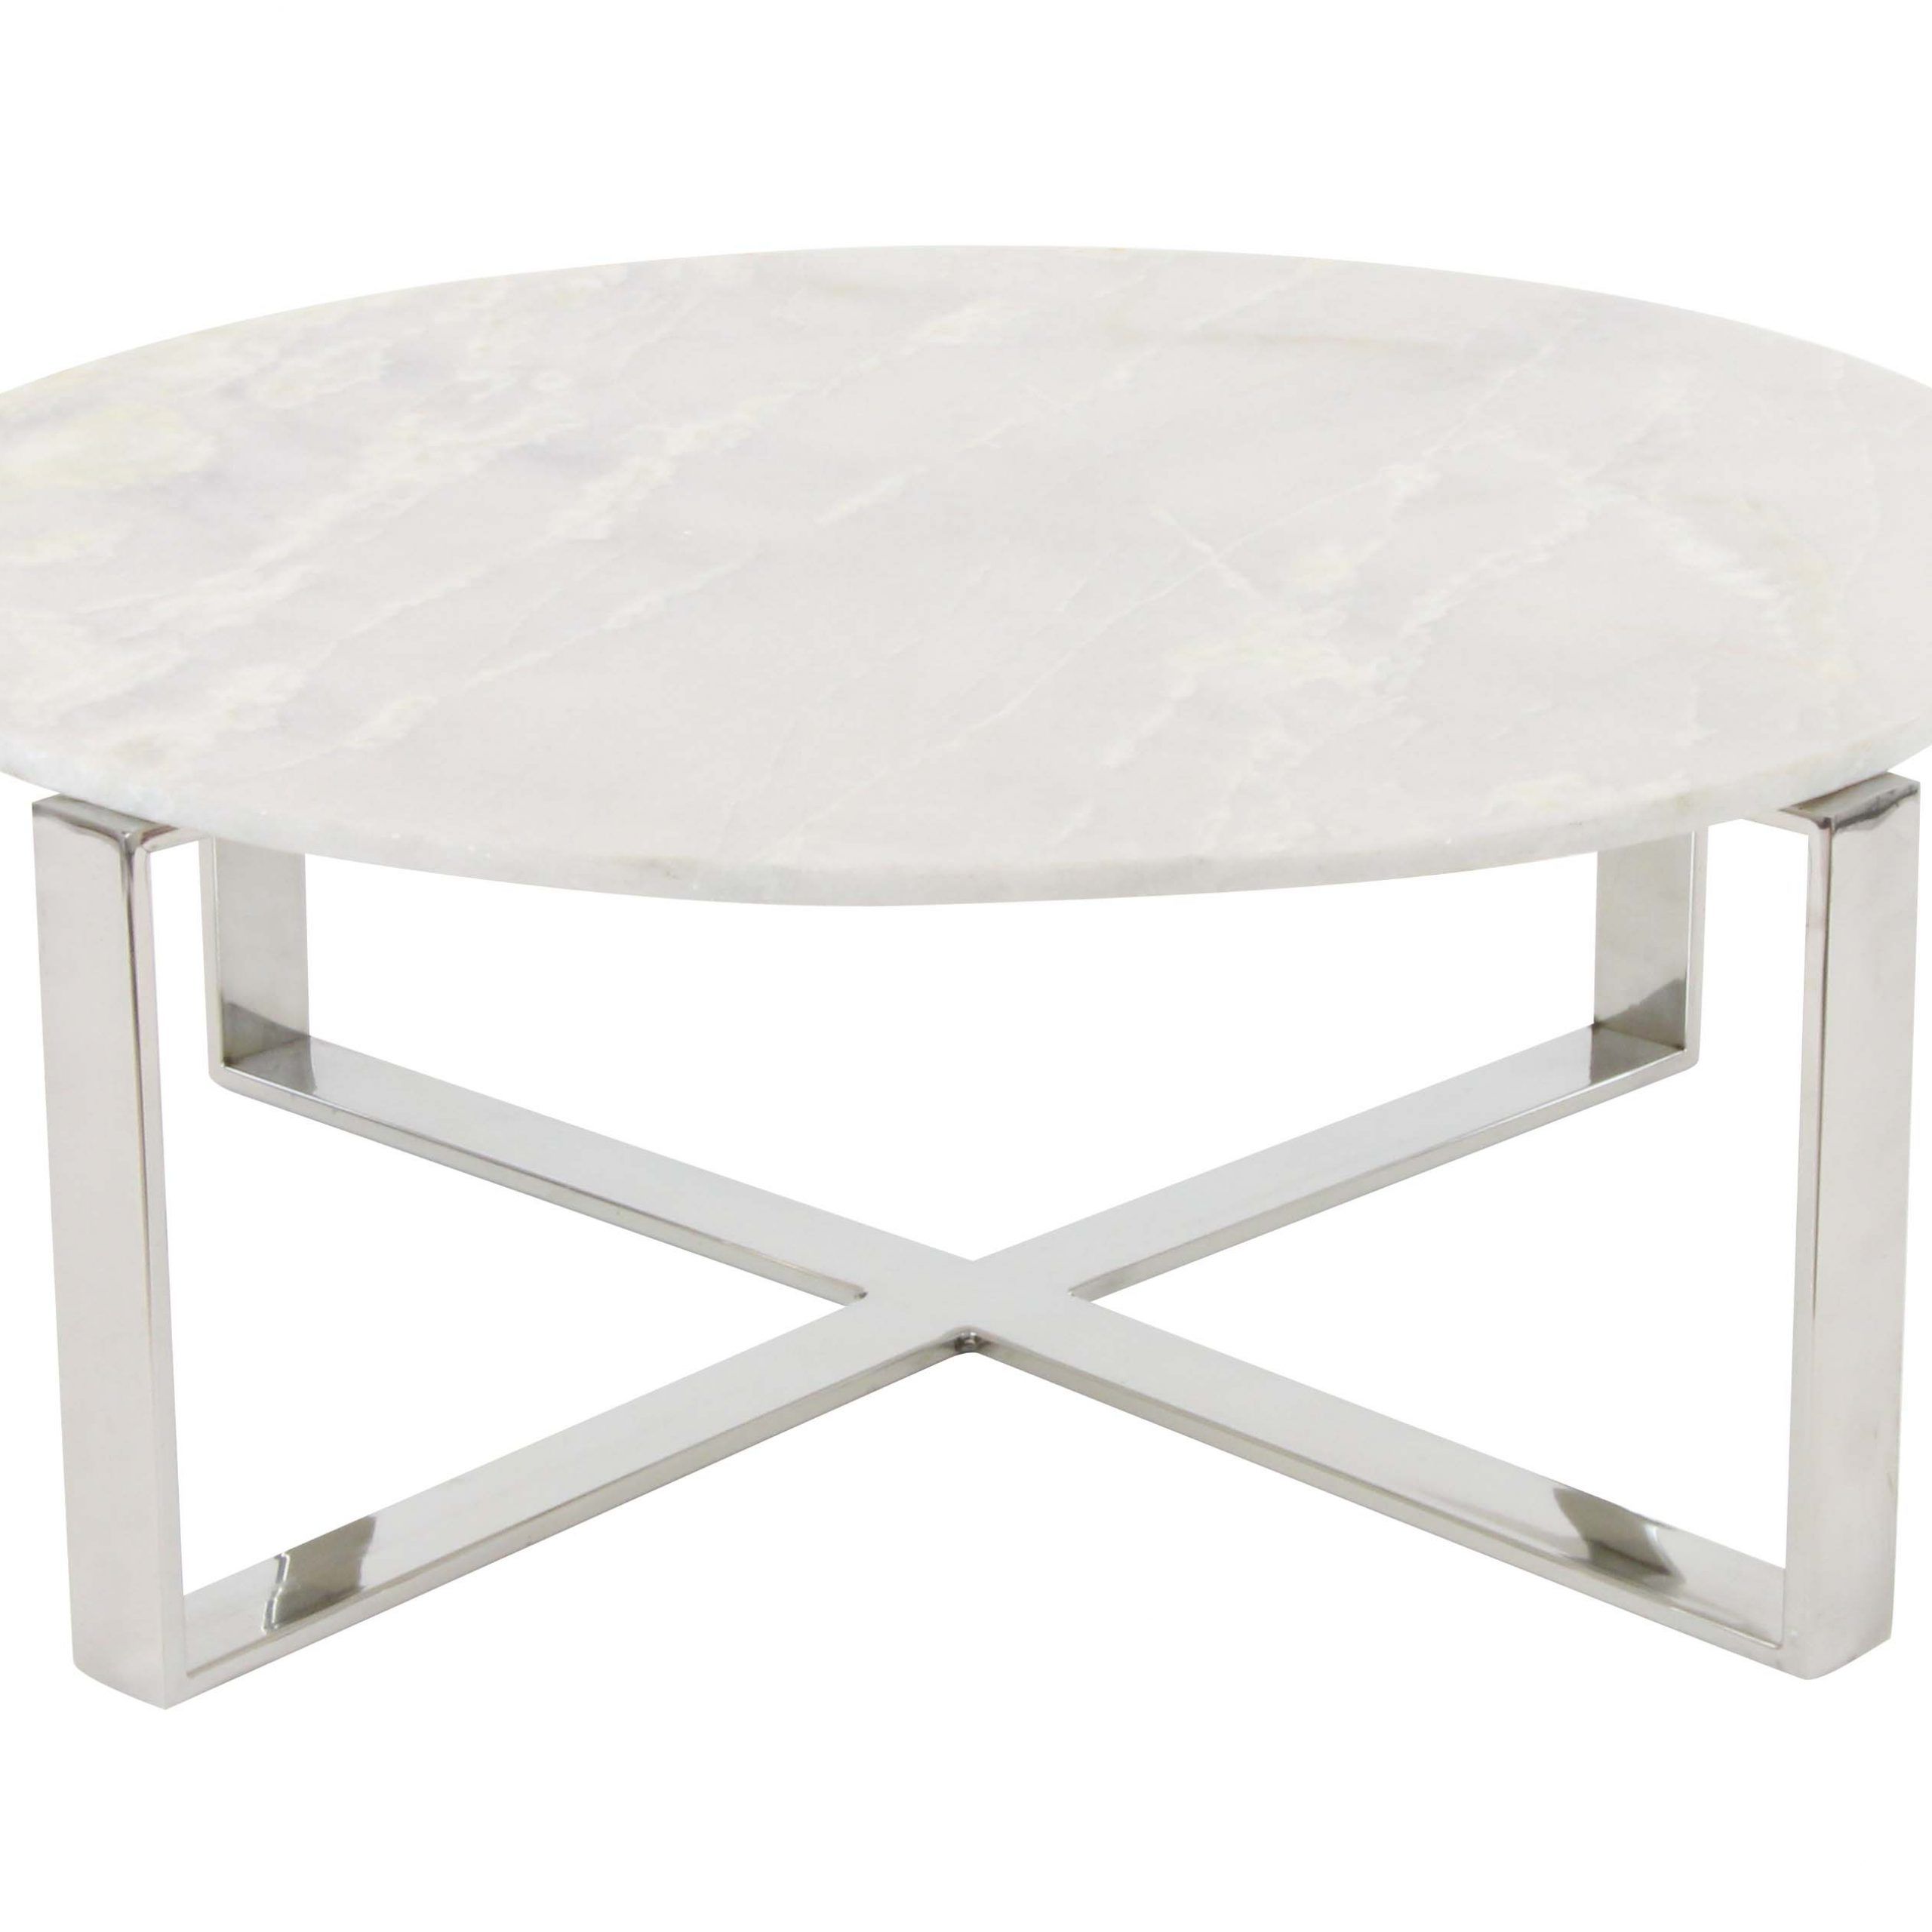 White Marble Gold Metal Coffee Tables Pertaining To Well Known Decmode 31" Round White Marble Coffee Table W/ Silver (View 14 of 20)